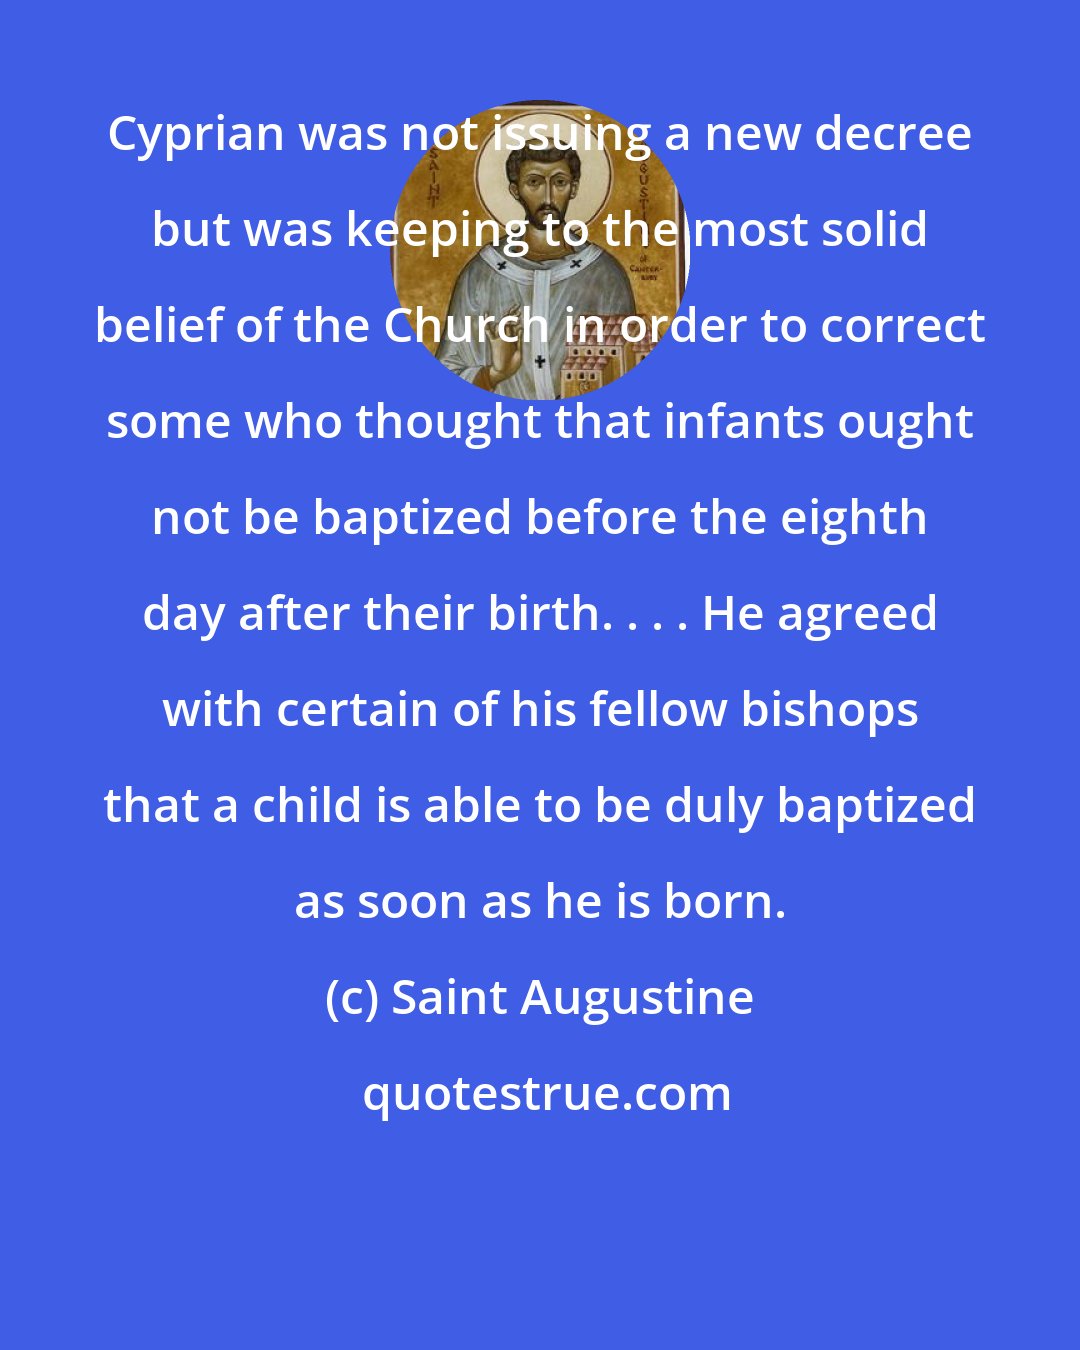 Saint Augustine: Cyprian was not issuing a new decree but was keeping to the most solid belief of the Church in order to correct some who thought that infants ought not be baptized before the eighth day after their birth. . . . He agreed with certain of his fellow bishops that a child is able to be duly baptized as soon as he is born.